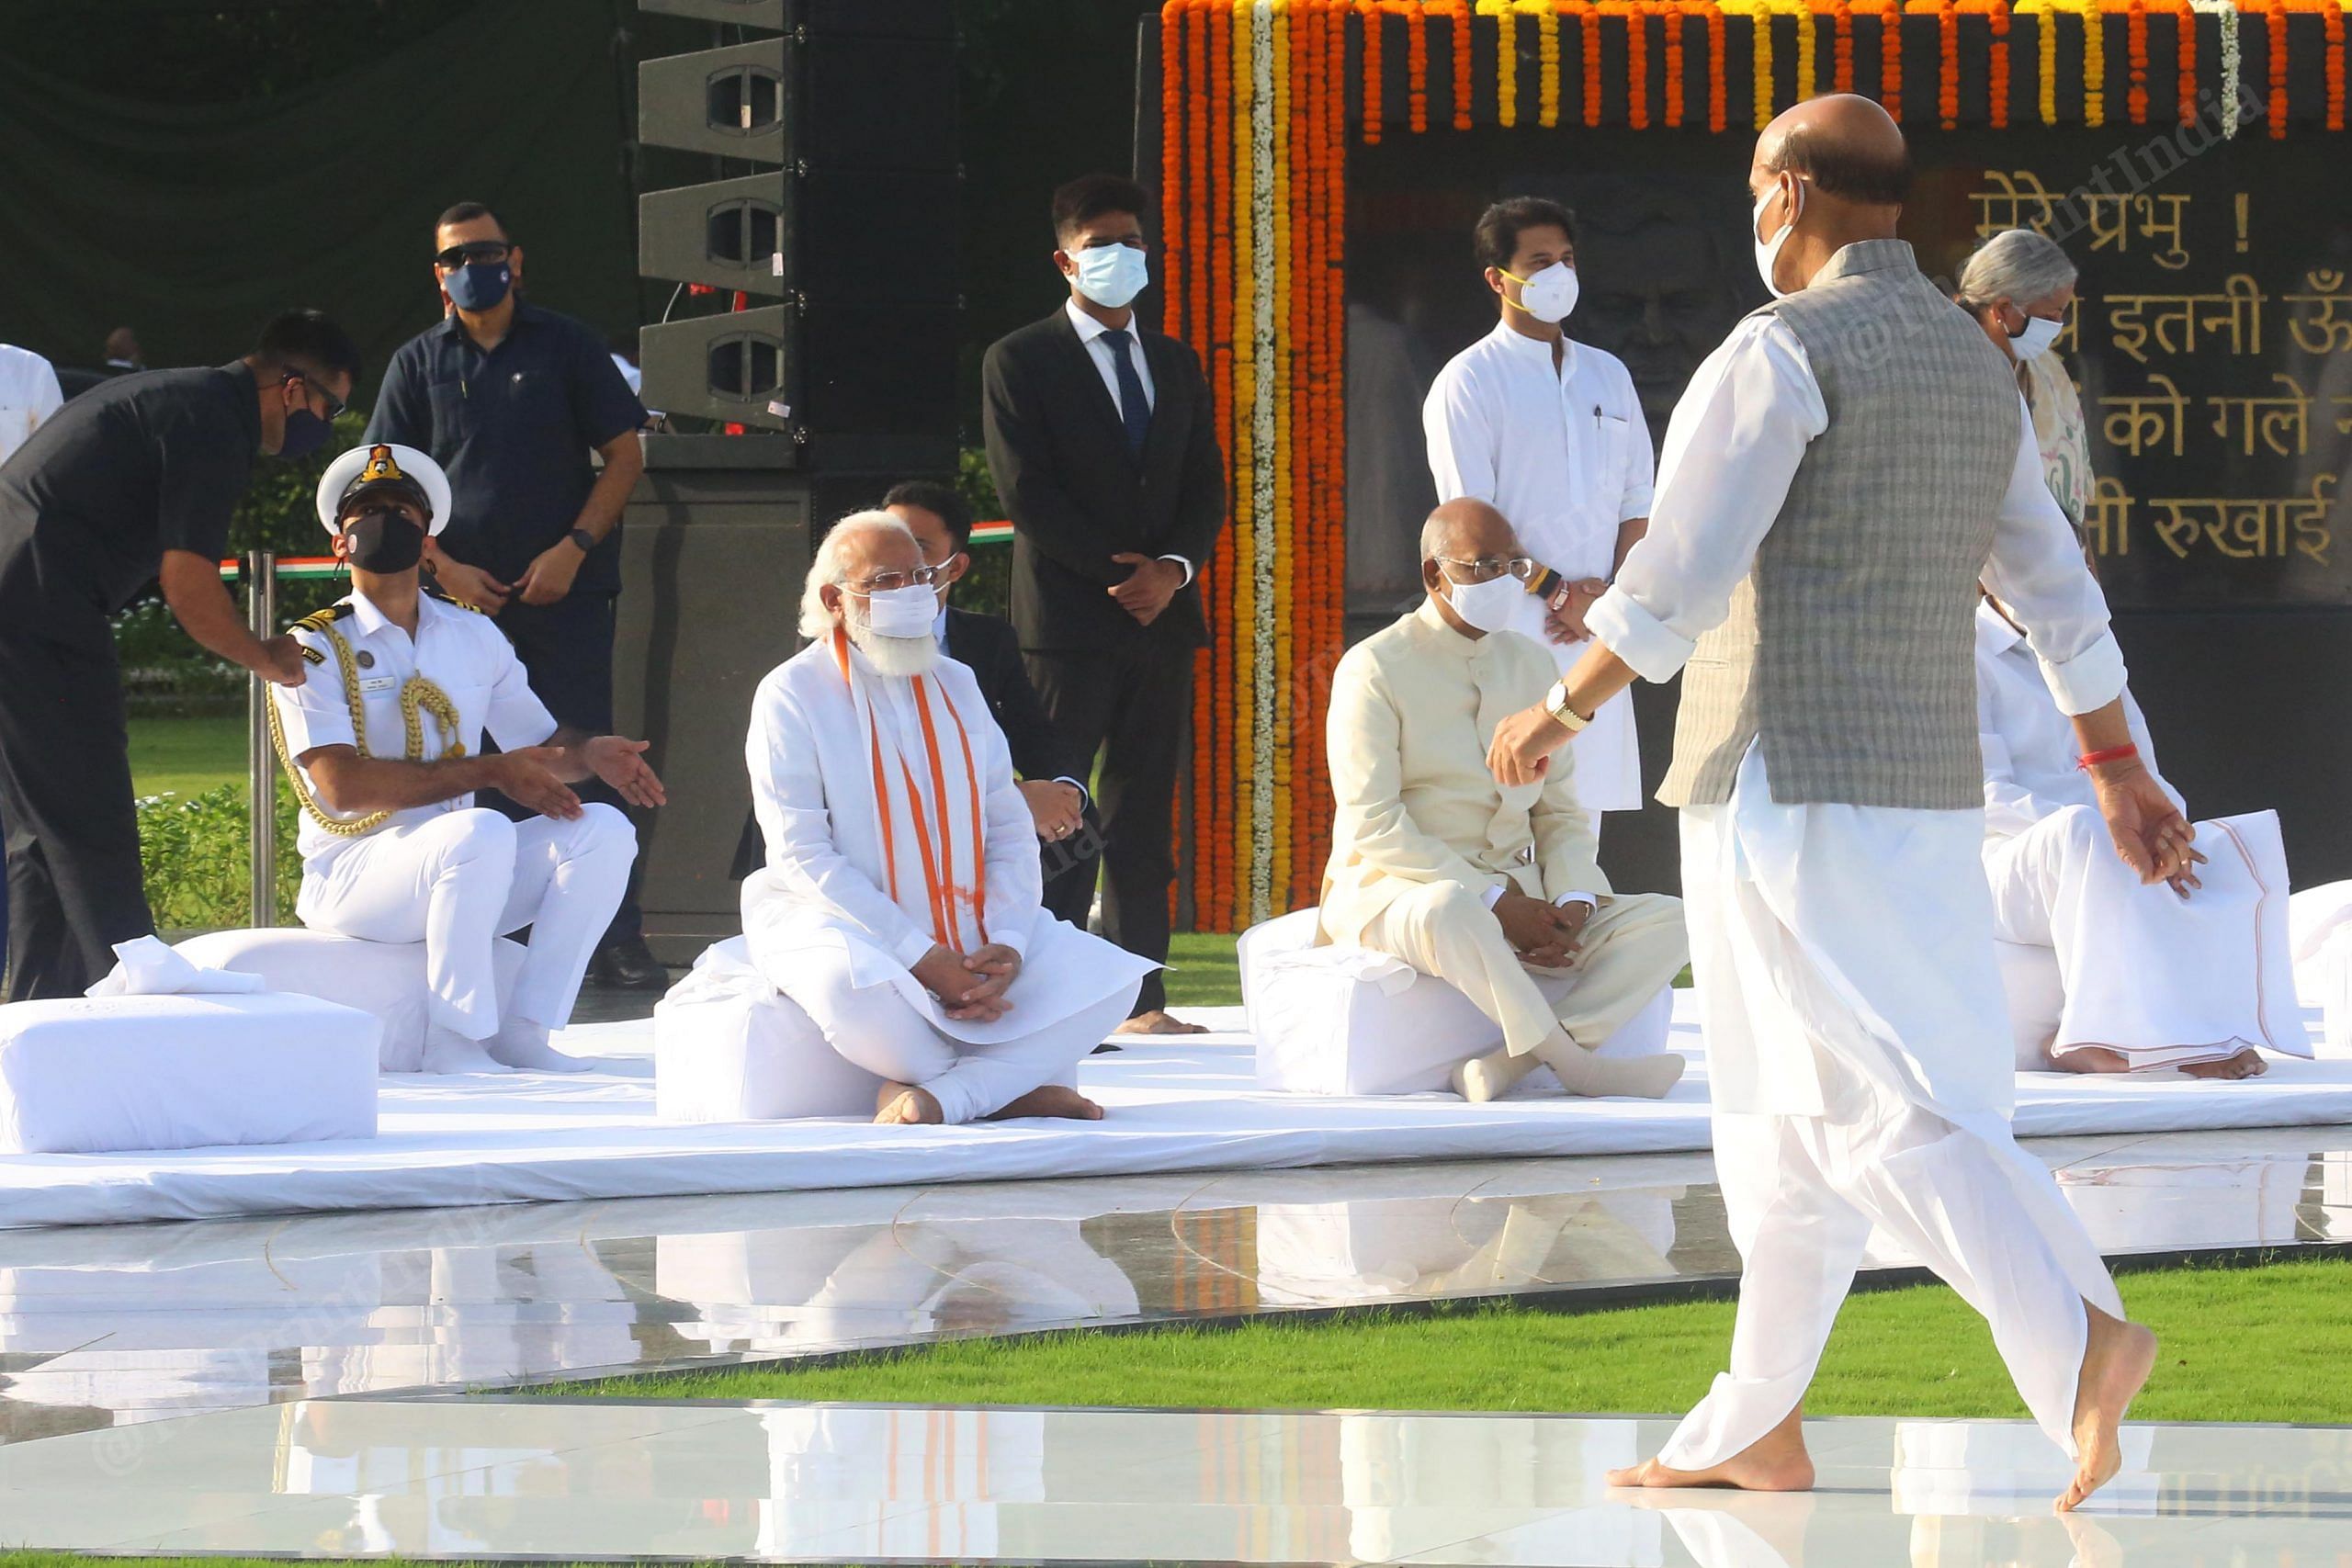 Defence Minister Rajnath Singh coming towards President of India Ramnath Kovind and Prime Minister Narendra Modi at Sadaiv Atal to pay tribute to former PM Atal Bihari Vajpayee on his death anniversary, in New Delhi | Photo: Praveen Jain | ThePrint | Photo: Praveen Jain | ThePrint